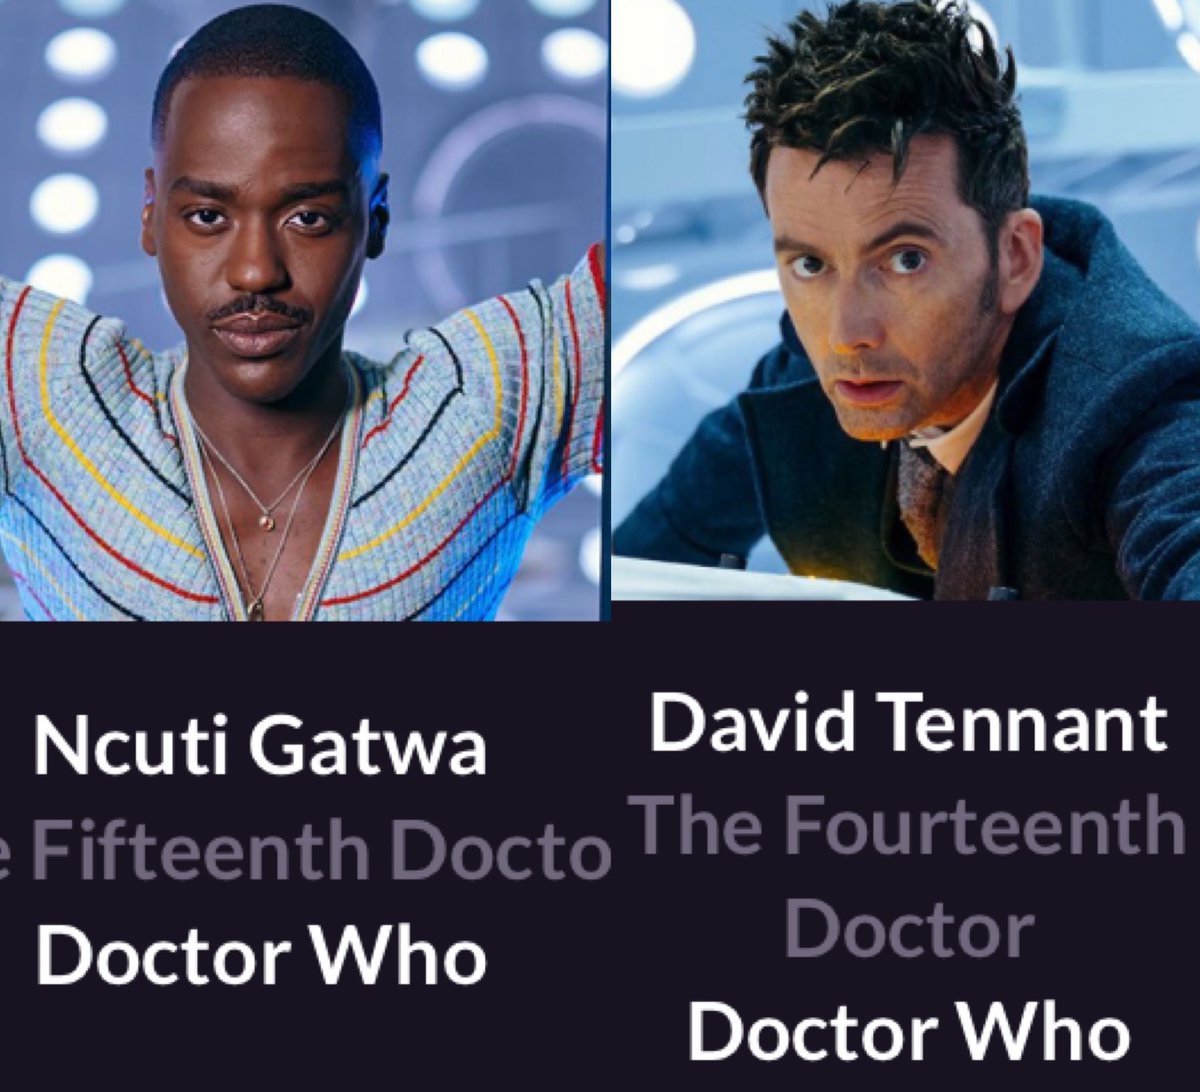 David Tennant and Ncuti Gatwa are both nominated for the NTA awards for the best drama performance category ! 

#DoctorWho